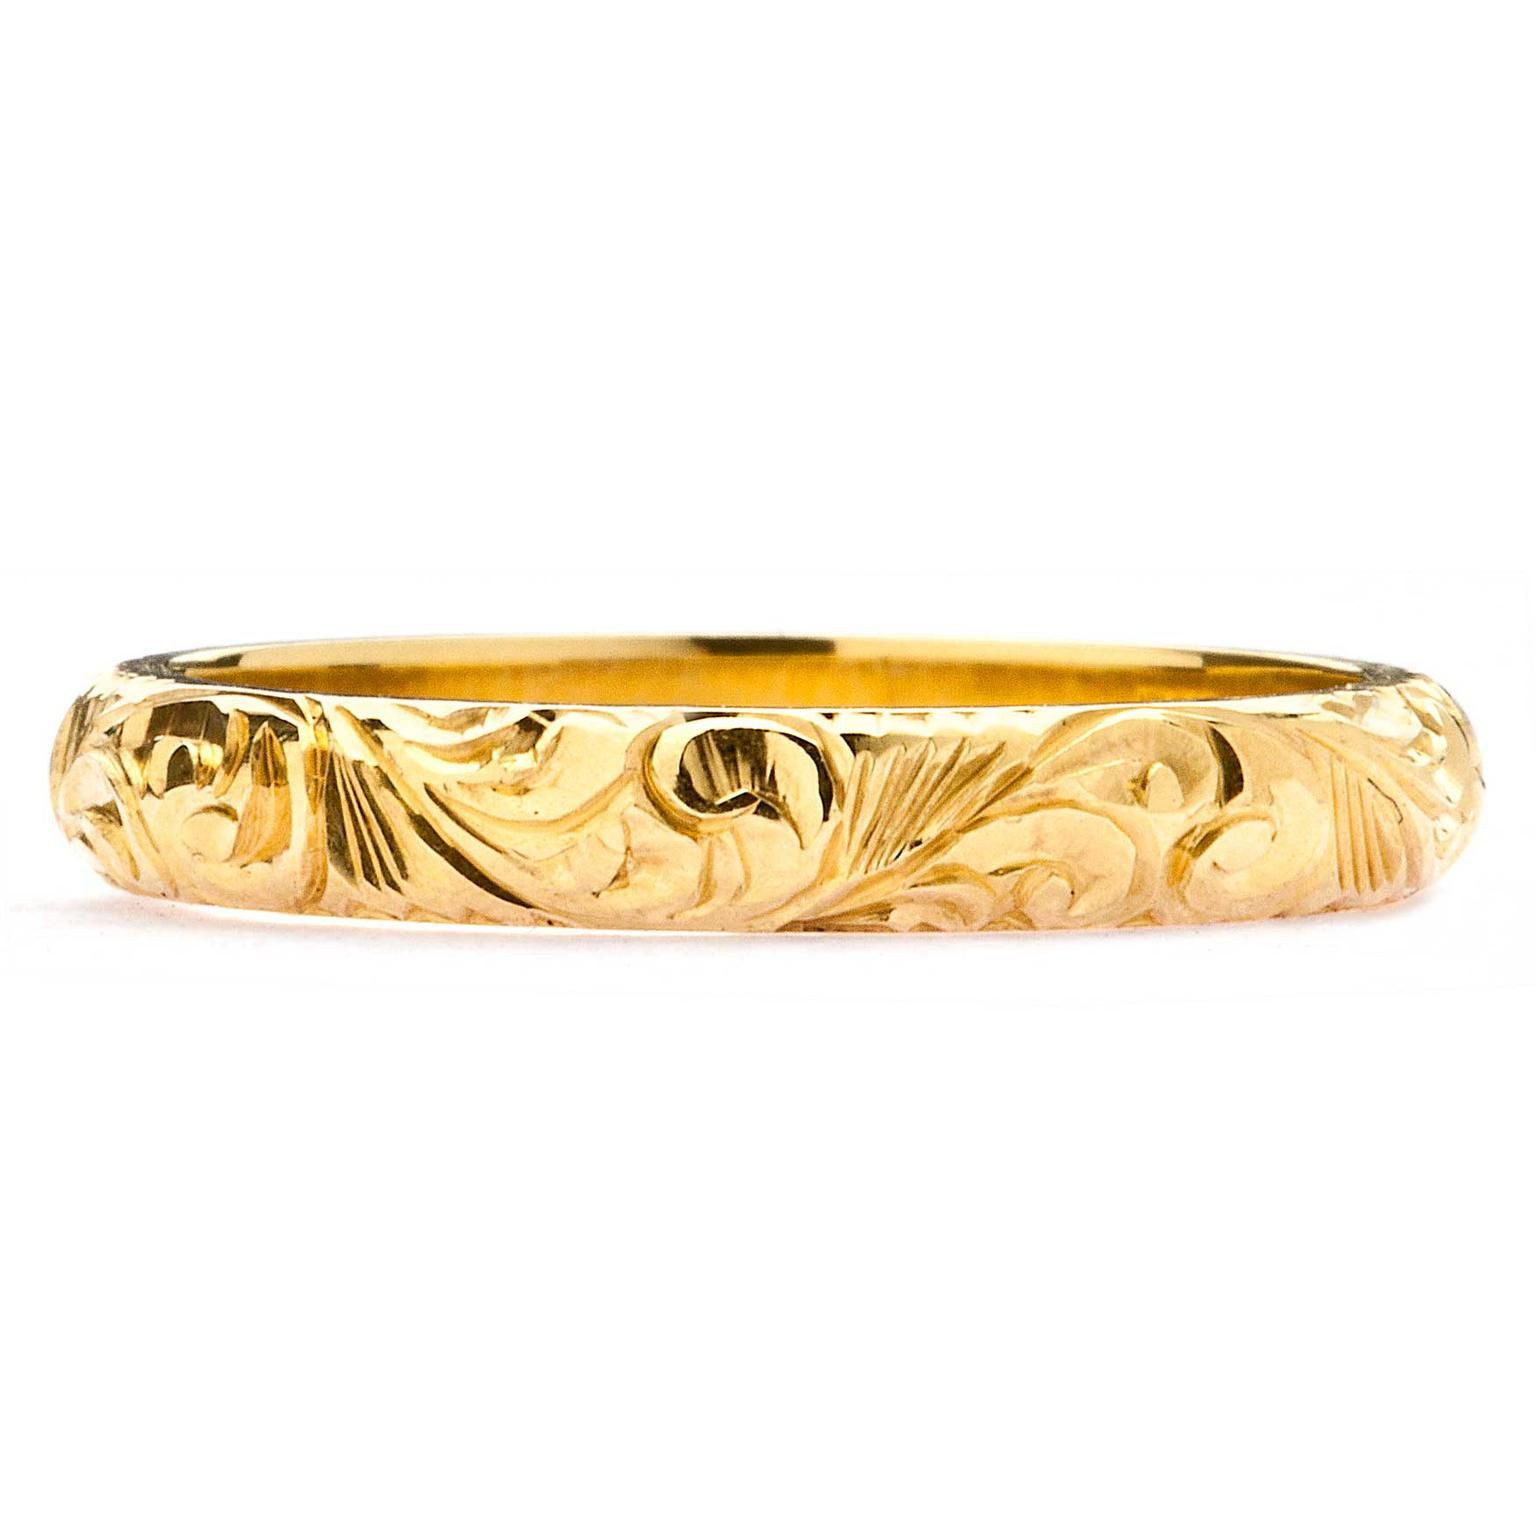 Ethical Wedding Rings
 Scrolls ethical gold wedding ring